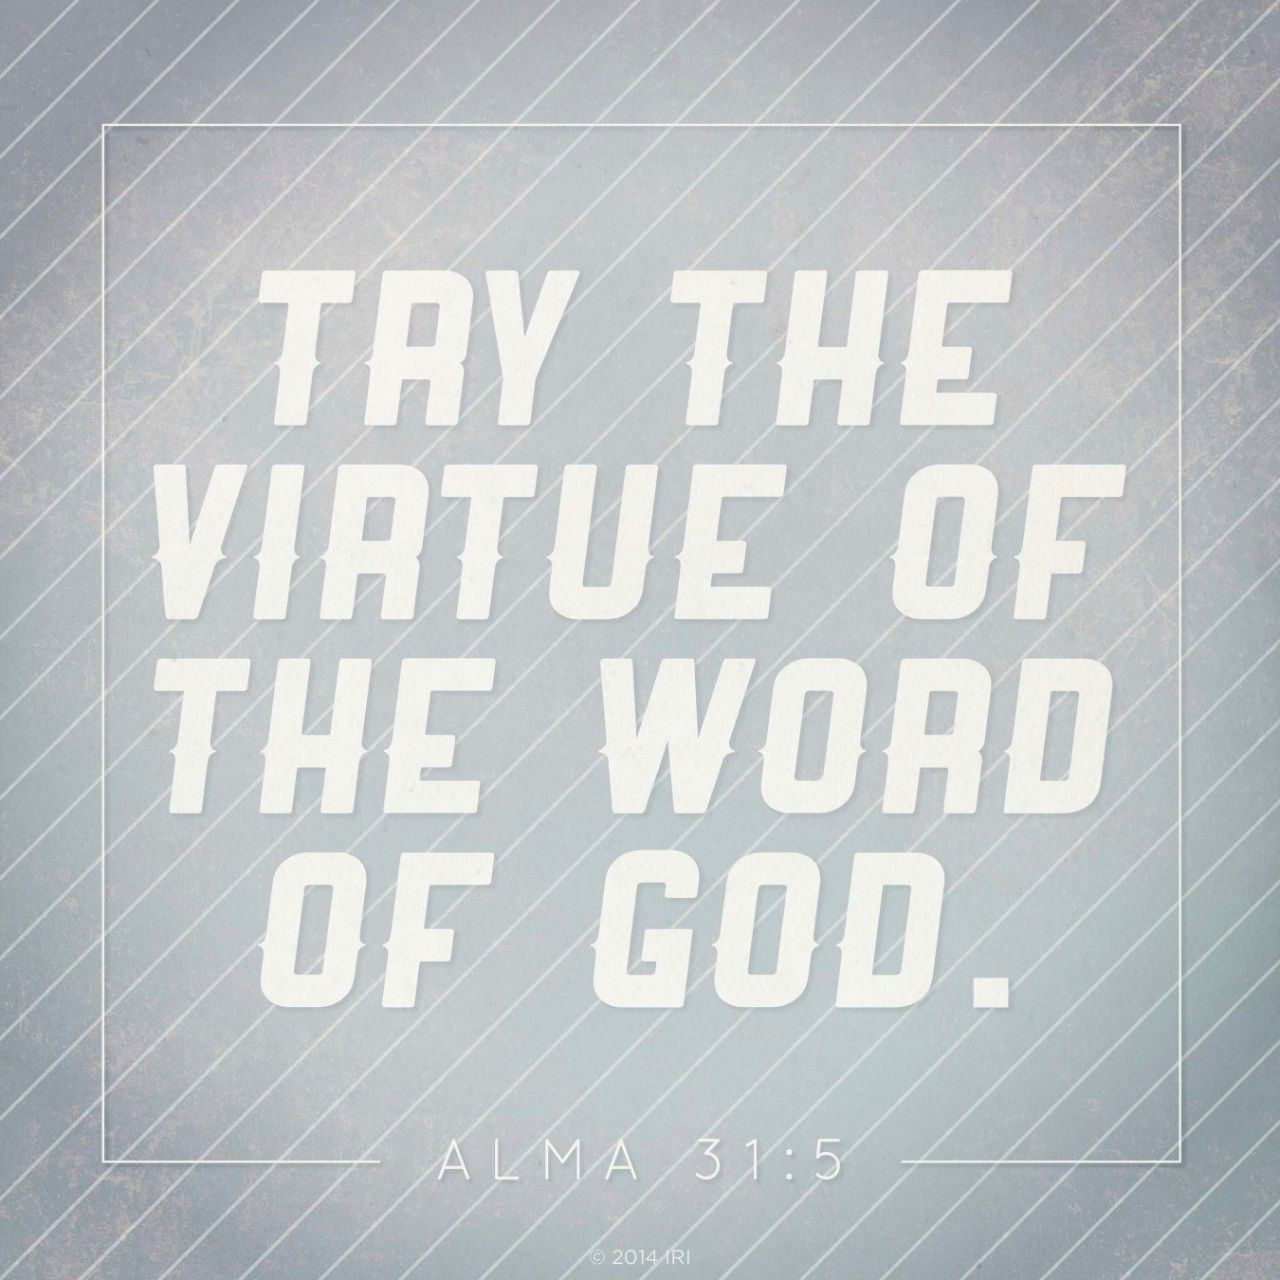 “Try the virtue of the word of God.” —Alma 31:5